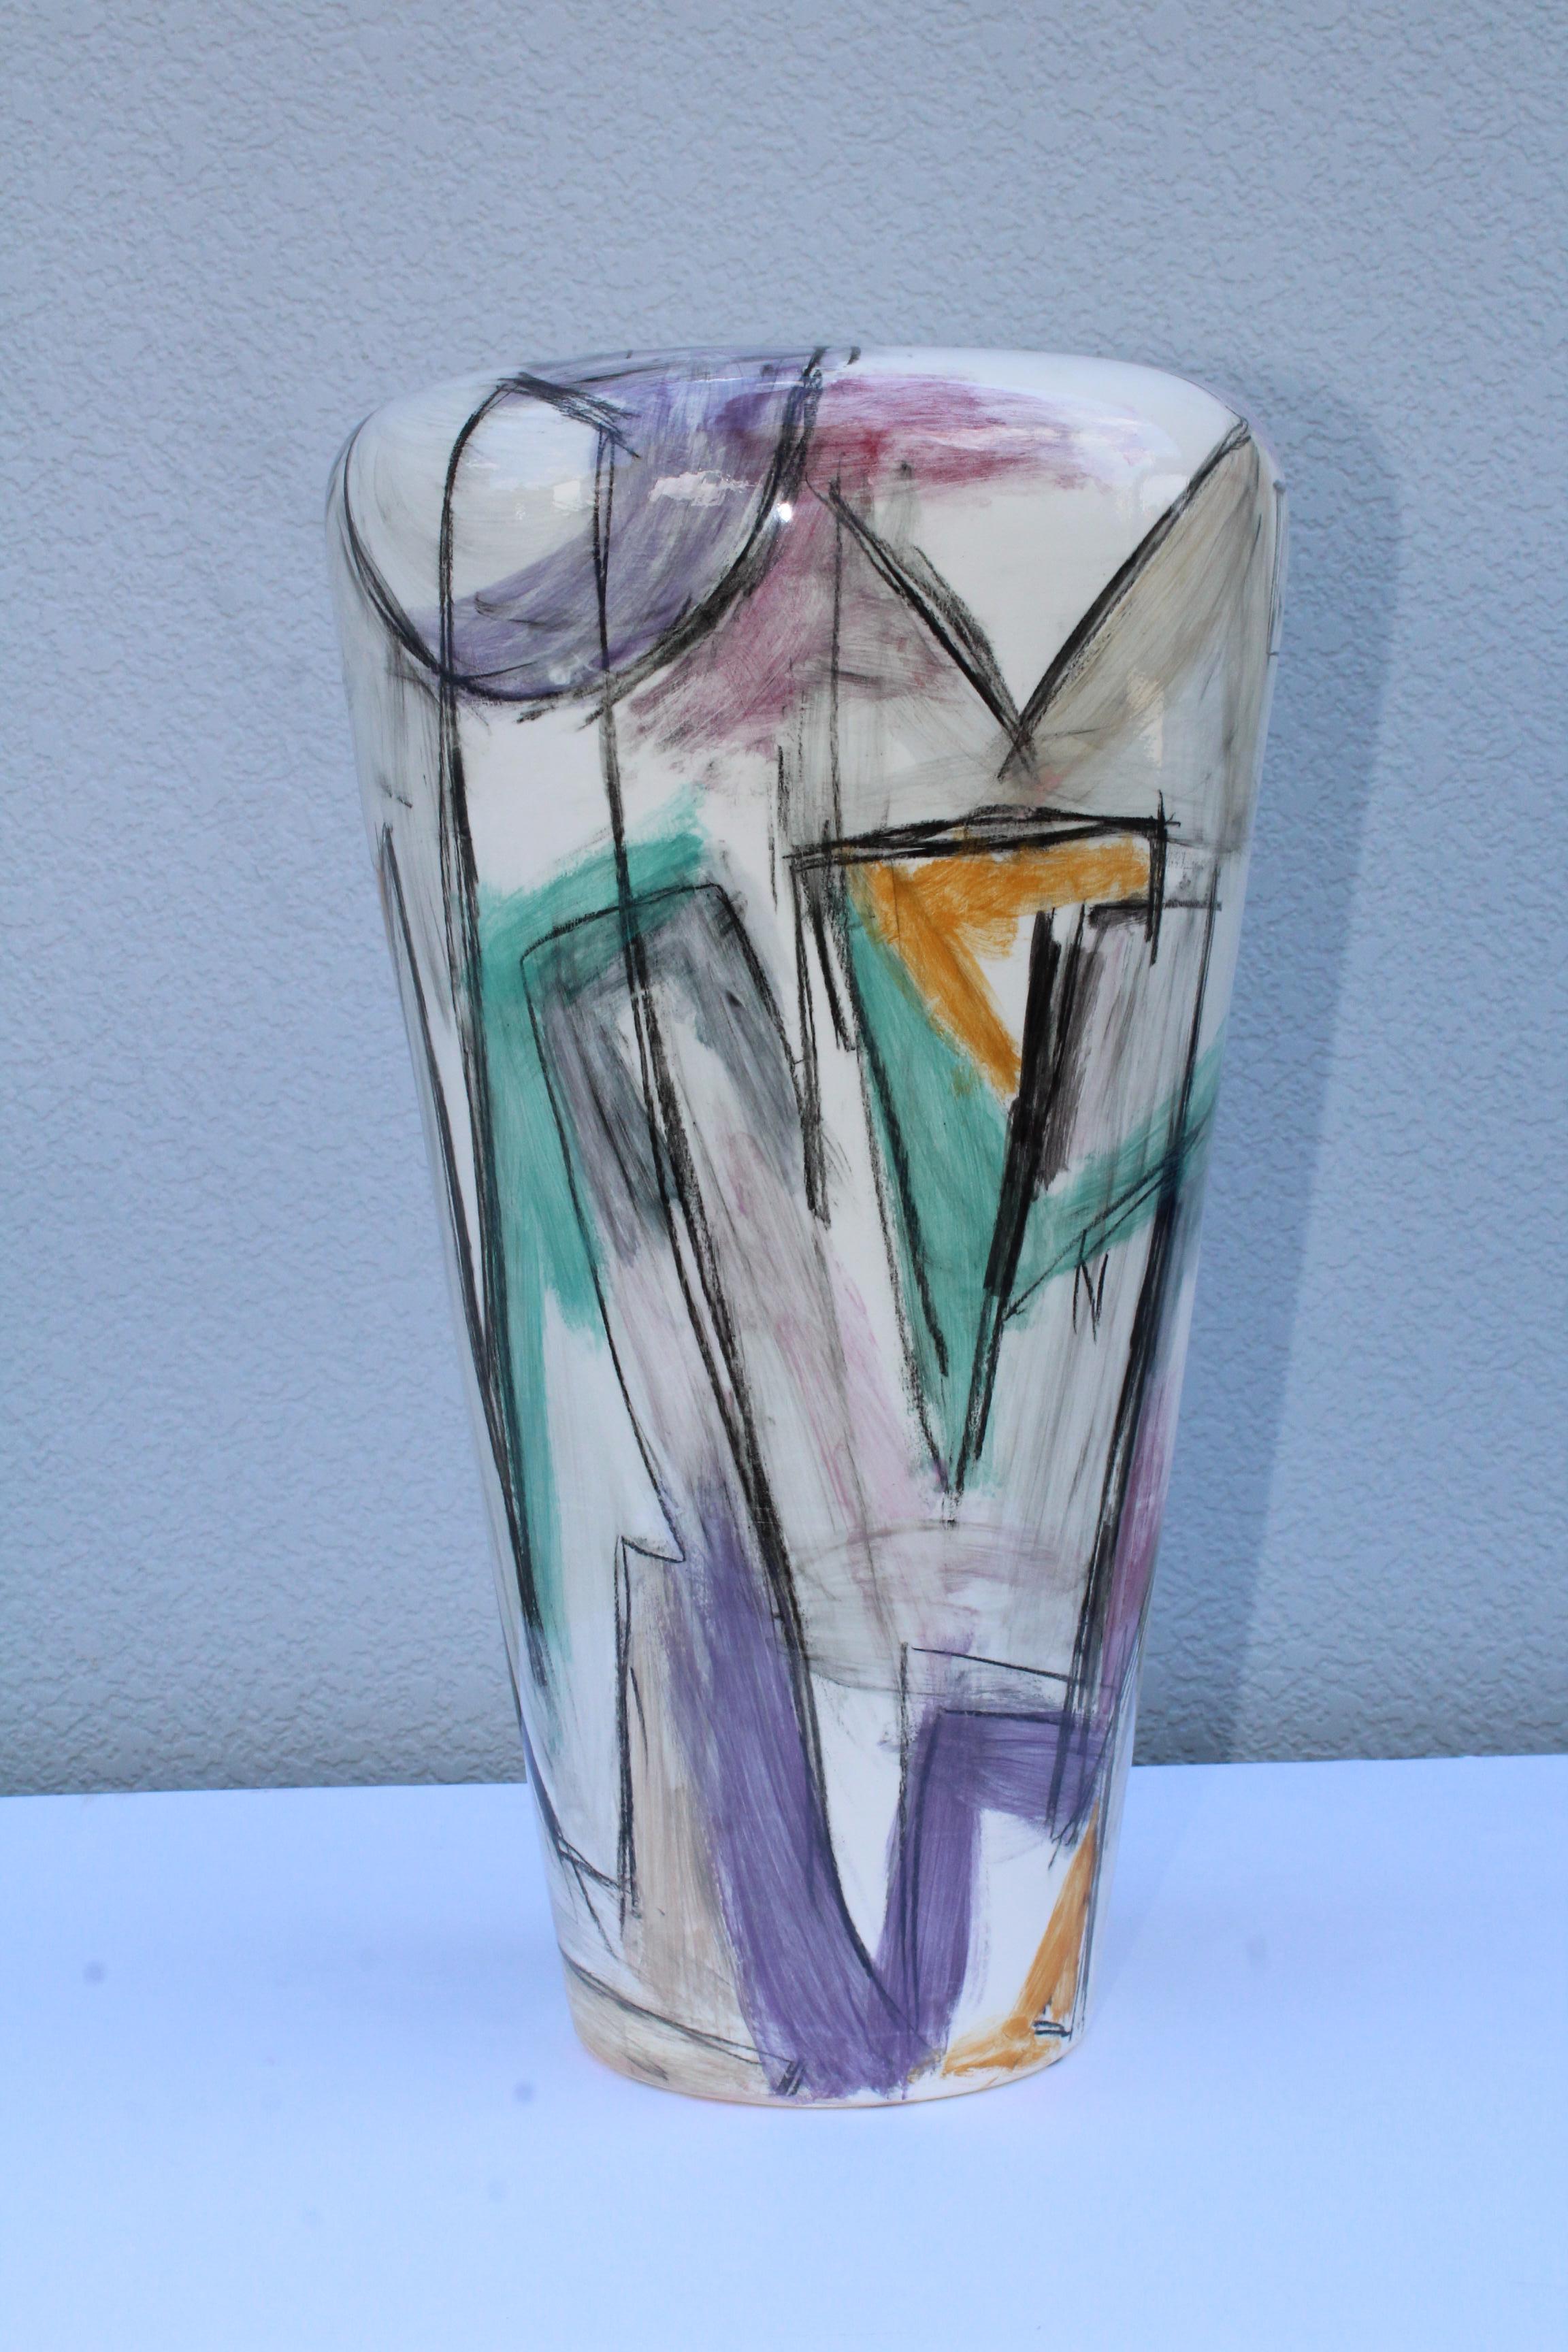 1980s large hand painted ceramic floor vase. Signed and dated.